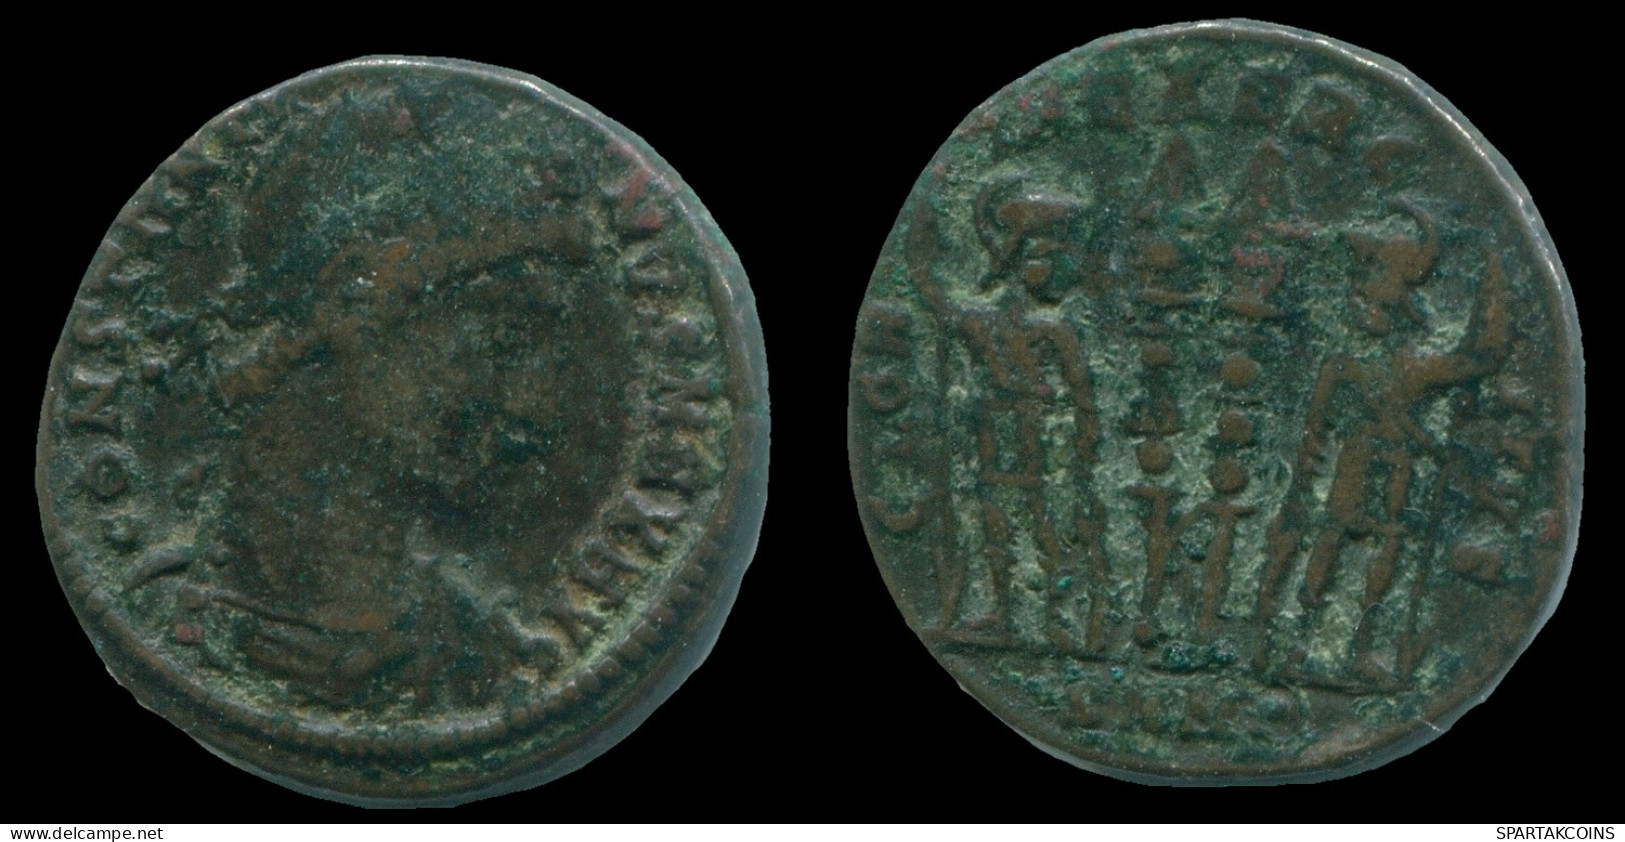 CONSTANTINE I NICOMEDIA Mint ( SMN ) TWO SOLDIERS #ANC13185.18.U.A - The Christian Empire (307 AD Tot 363 AD)